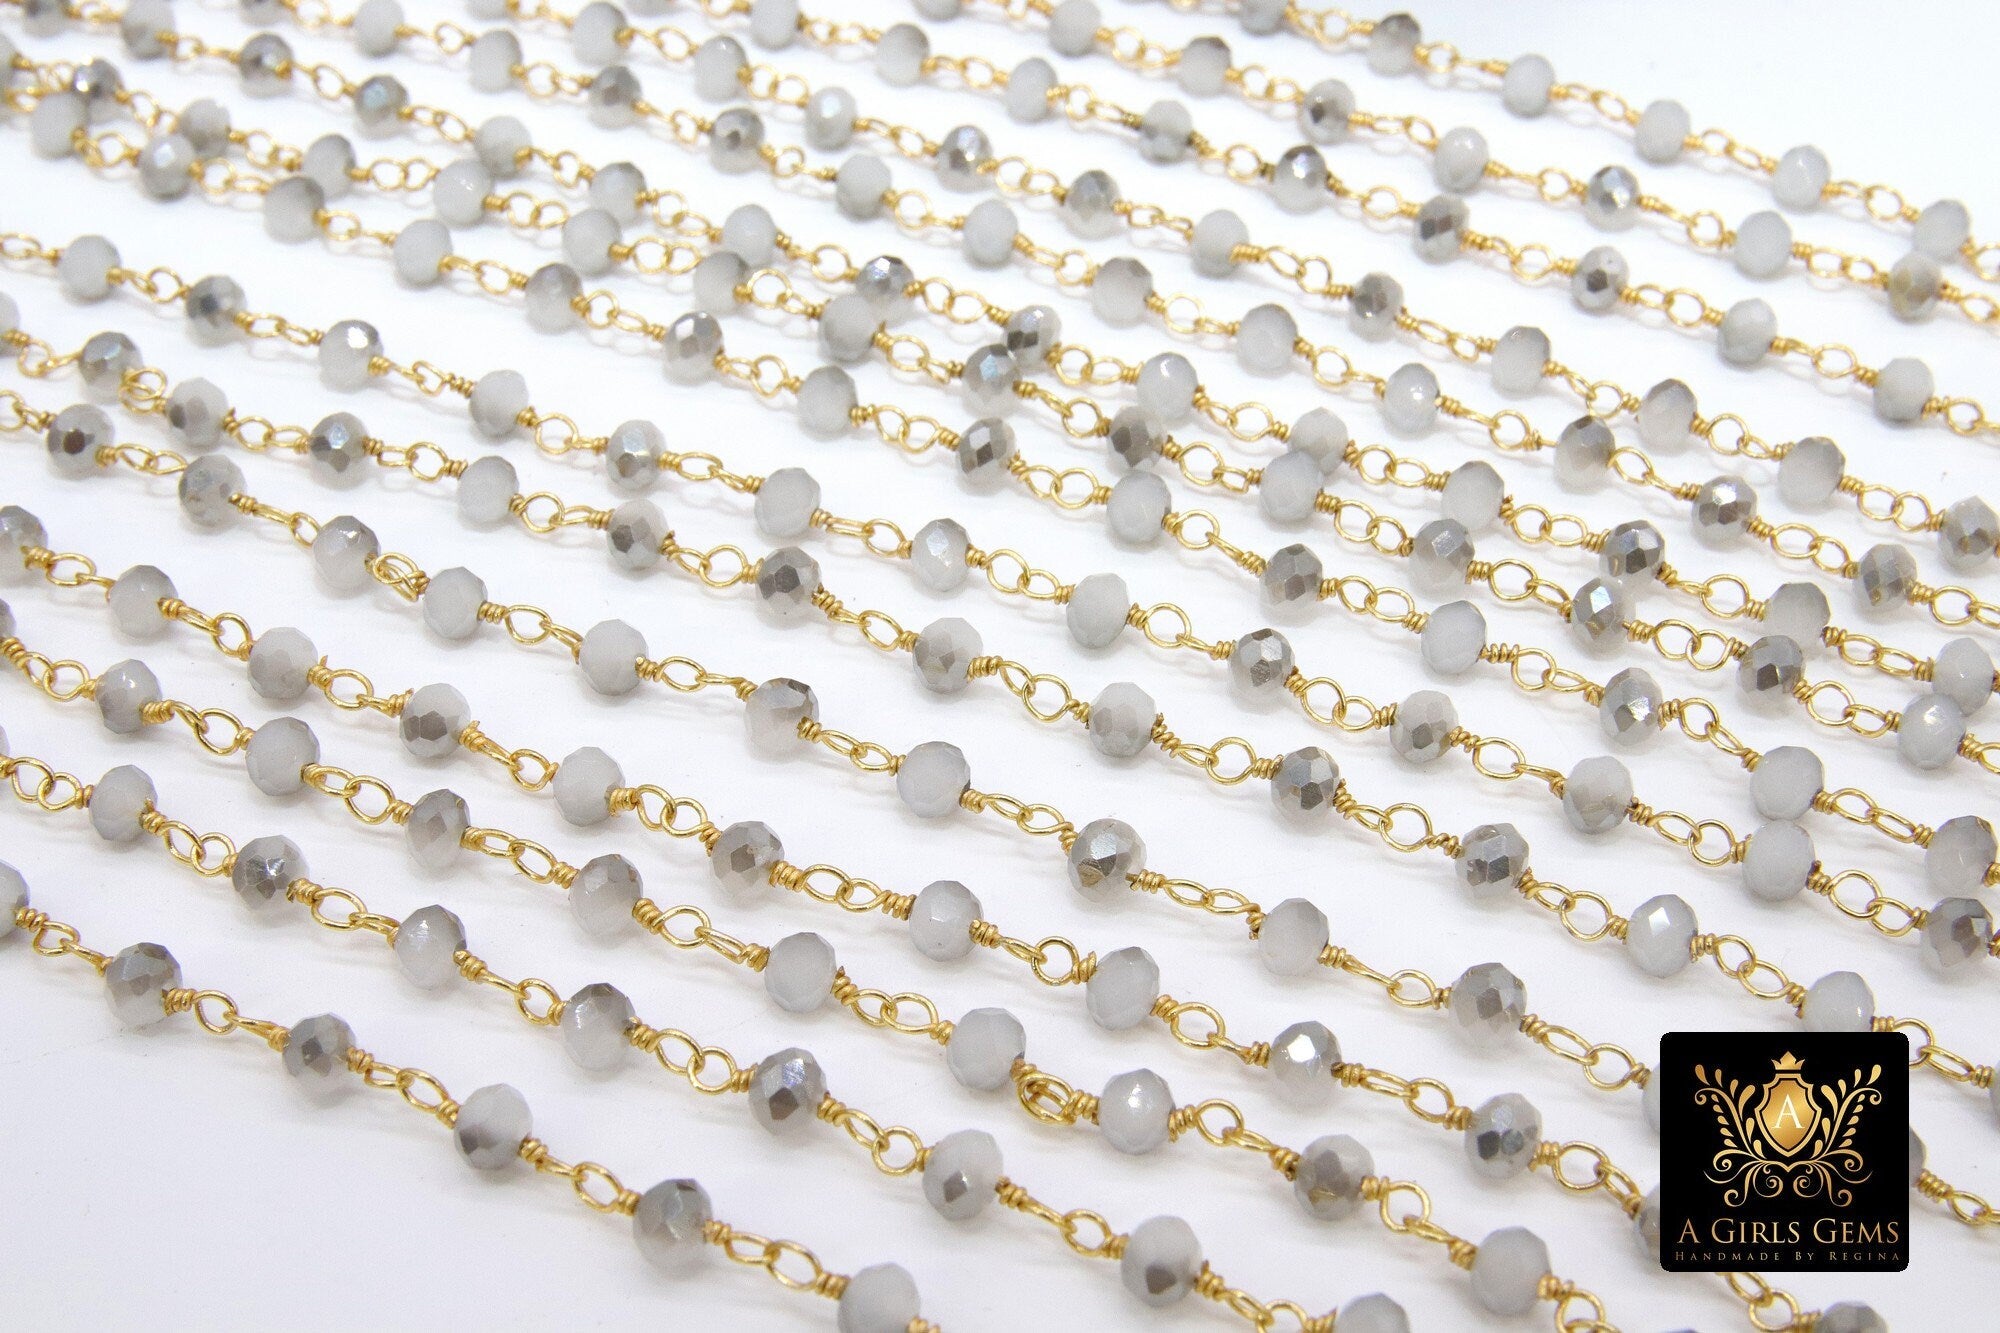 White Rosary Chain, 4 mm Light Gray White AB Beaded Chain CH #422, Gold Wire Wrapped Opalite